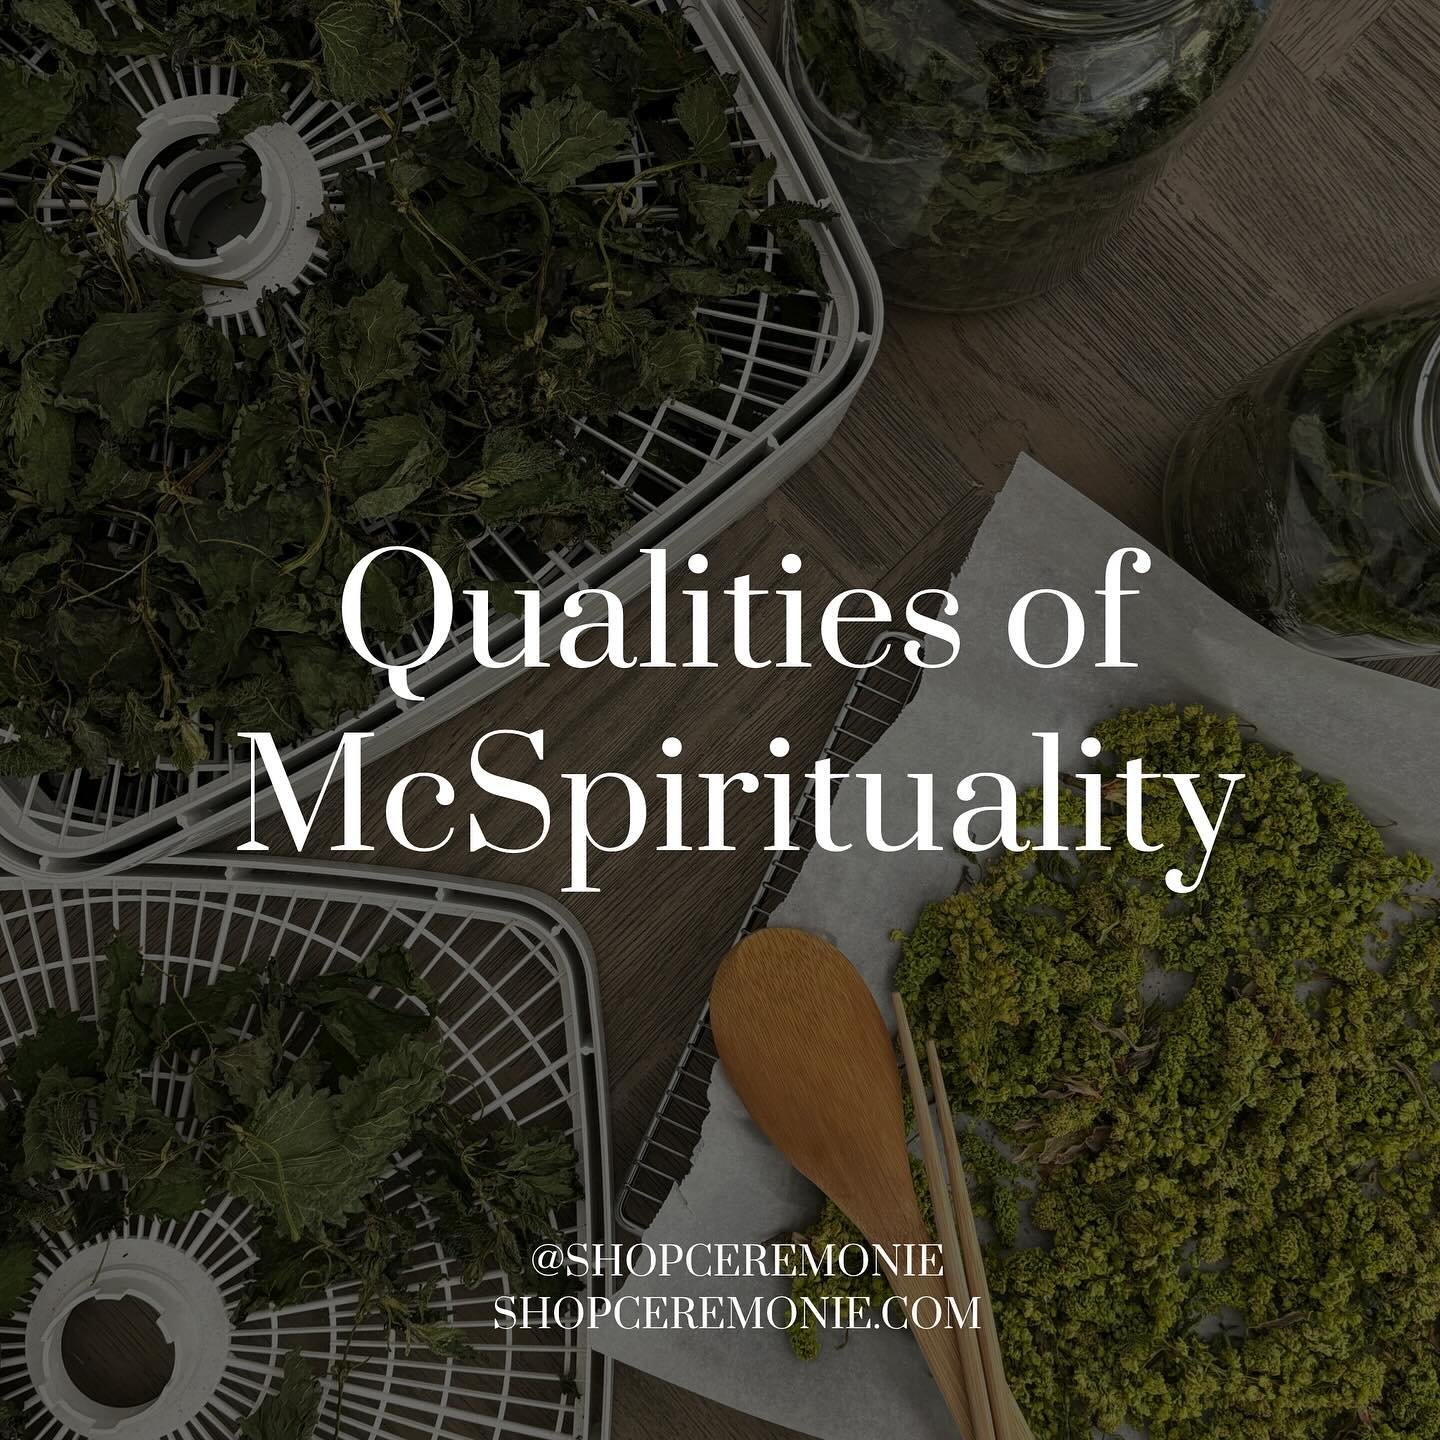 Qualities of McSpirituality⁣
⁣
McSpirituality justifies and even spiritualizes self-obsession, prioritizing one&rsquo;s own emotions and individuality over the needs and realities of a group.⁣
⁣
McSpirituality misuses psychology terms like &lsquo;tra